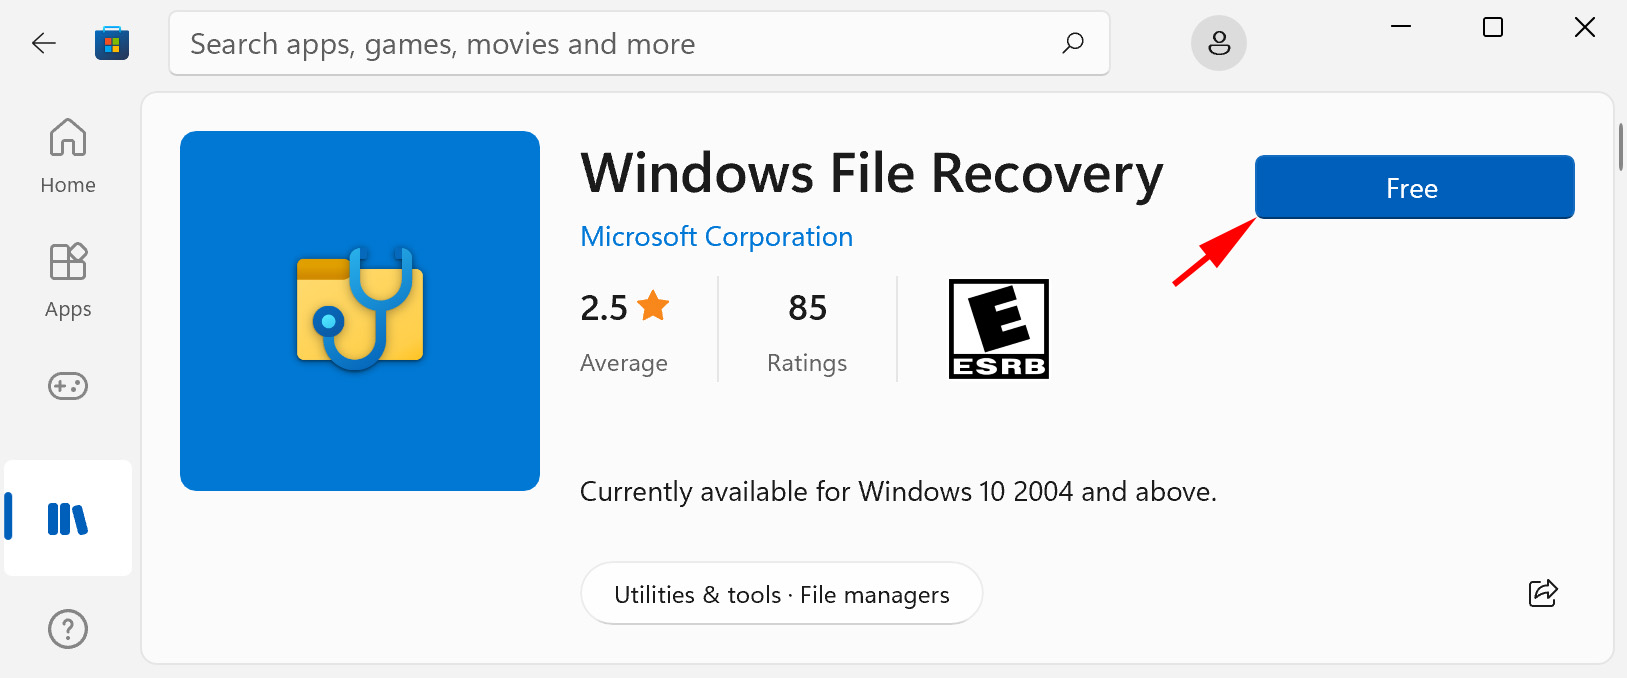 Install Windows File Recovery